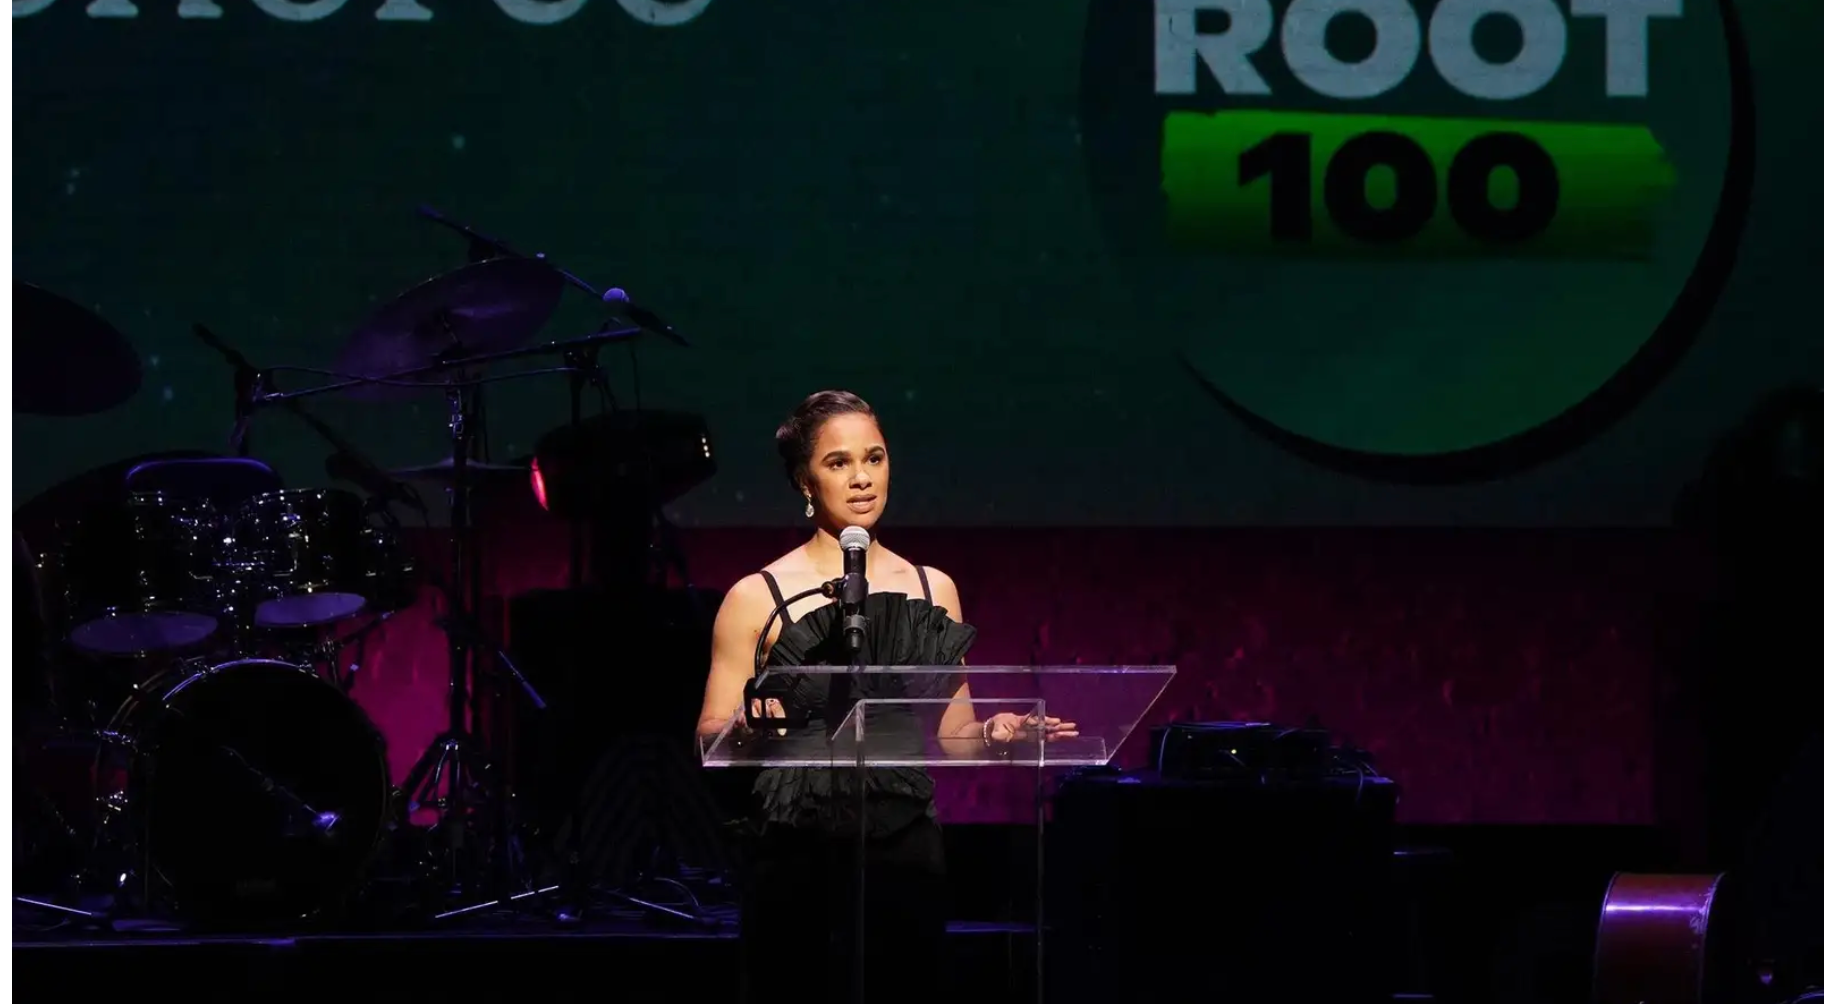 Celebrating Excellence And Impact : Check Out The Stars Who Were Honored At This Year’s Root 100 Gala